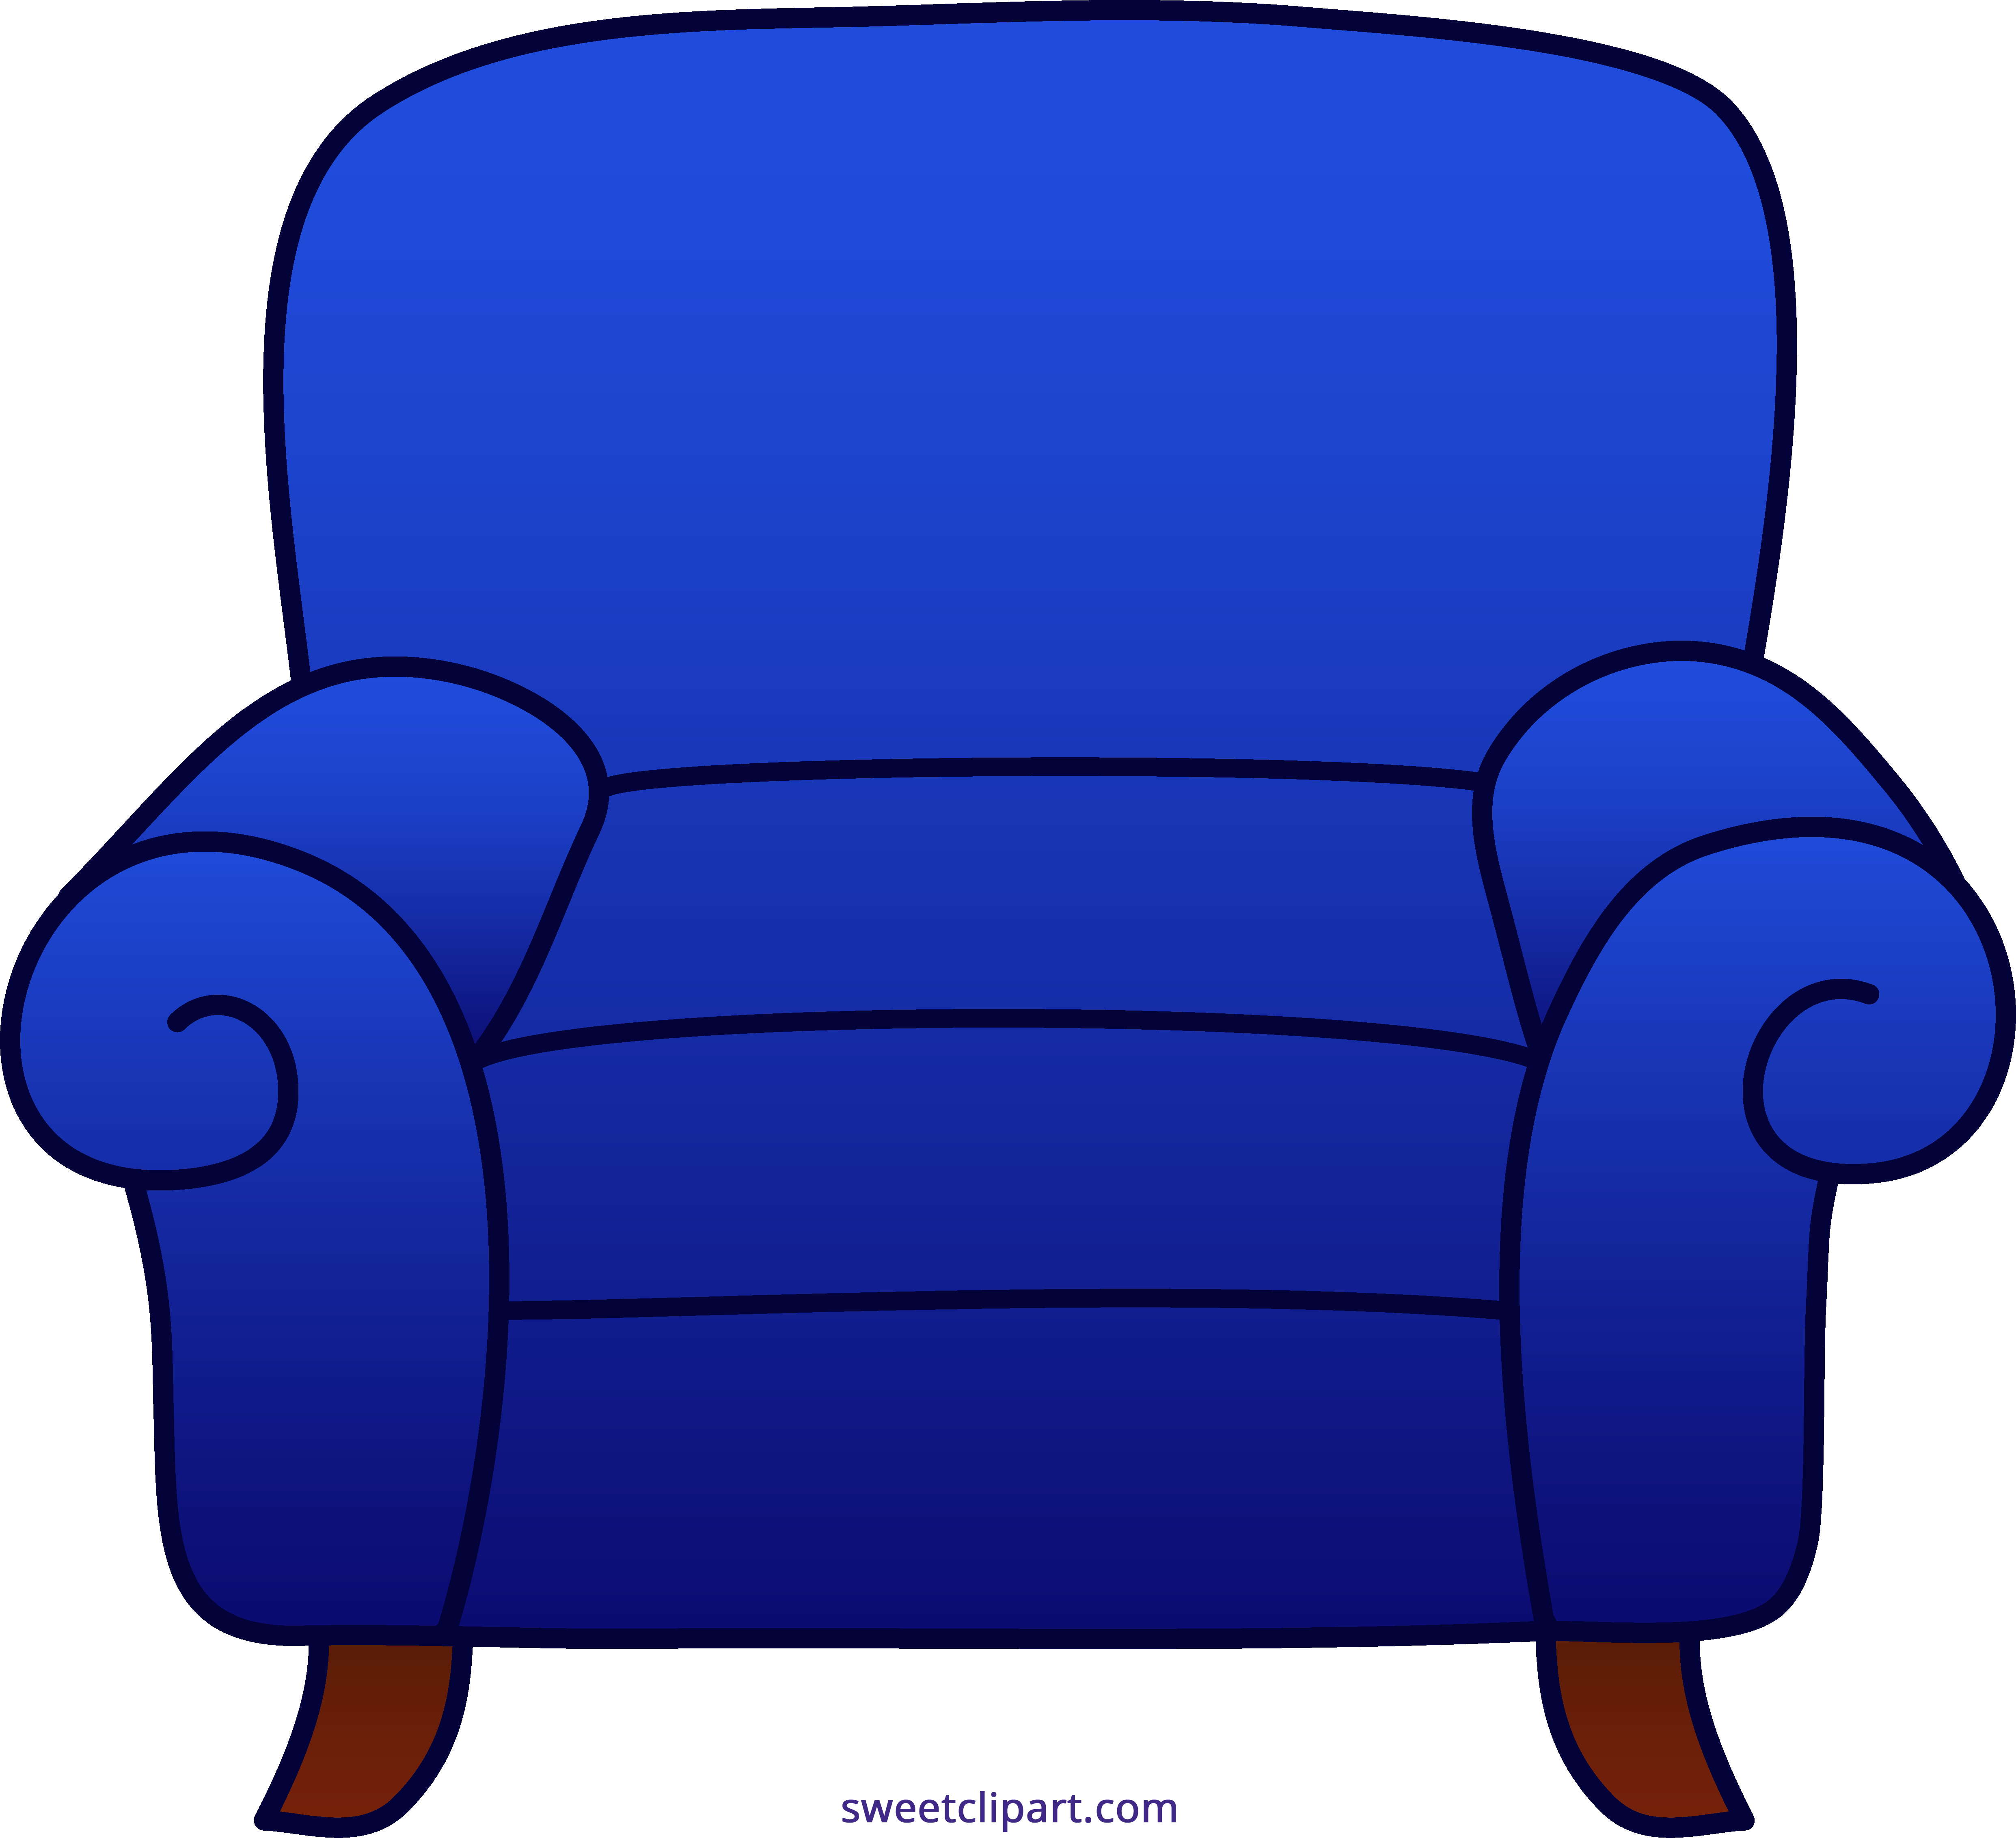 Furniture clipart easy chair, Furniture easy chair Transparent FREE.